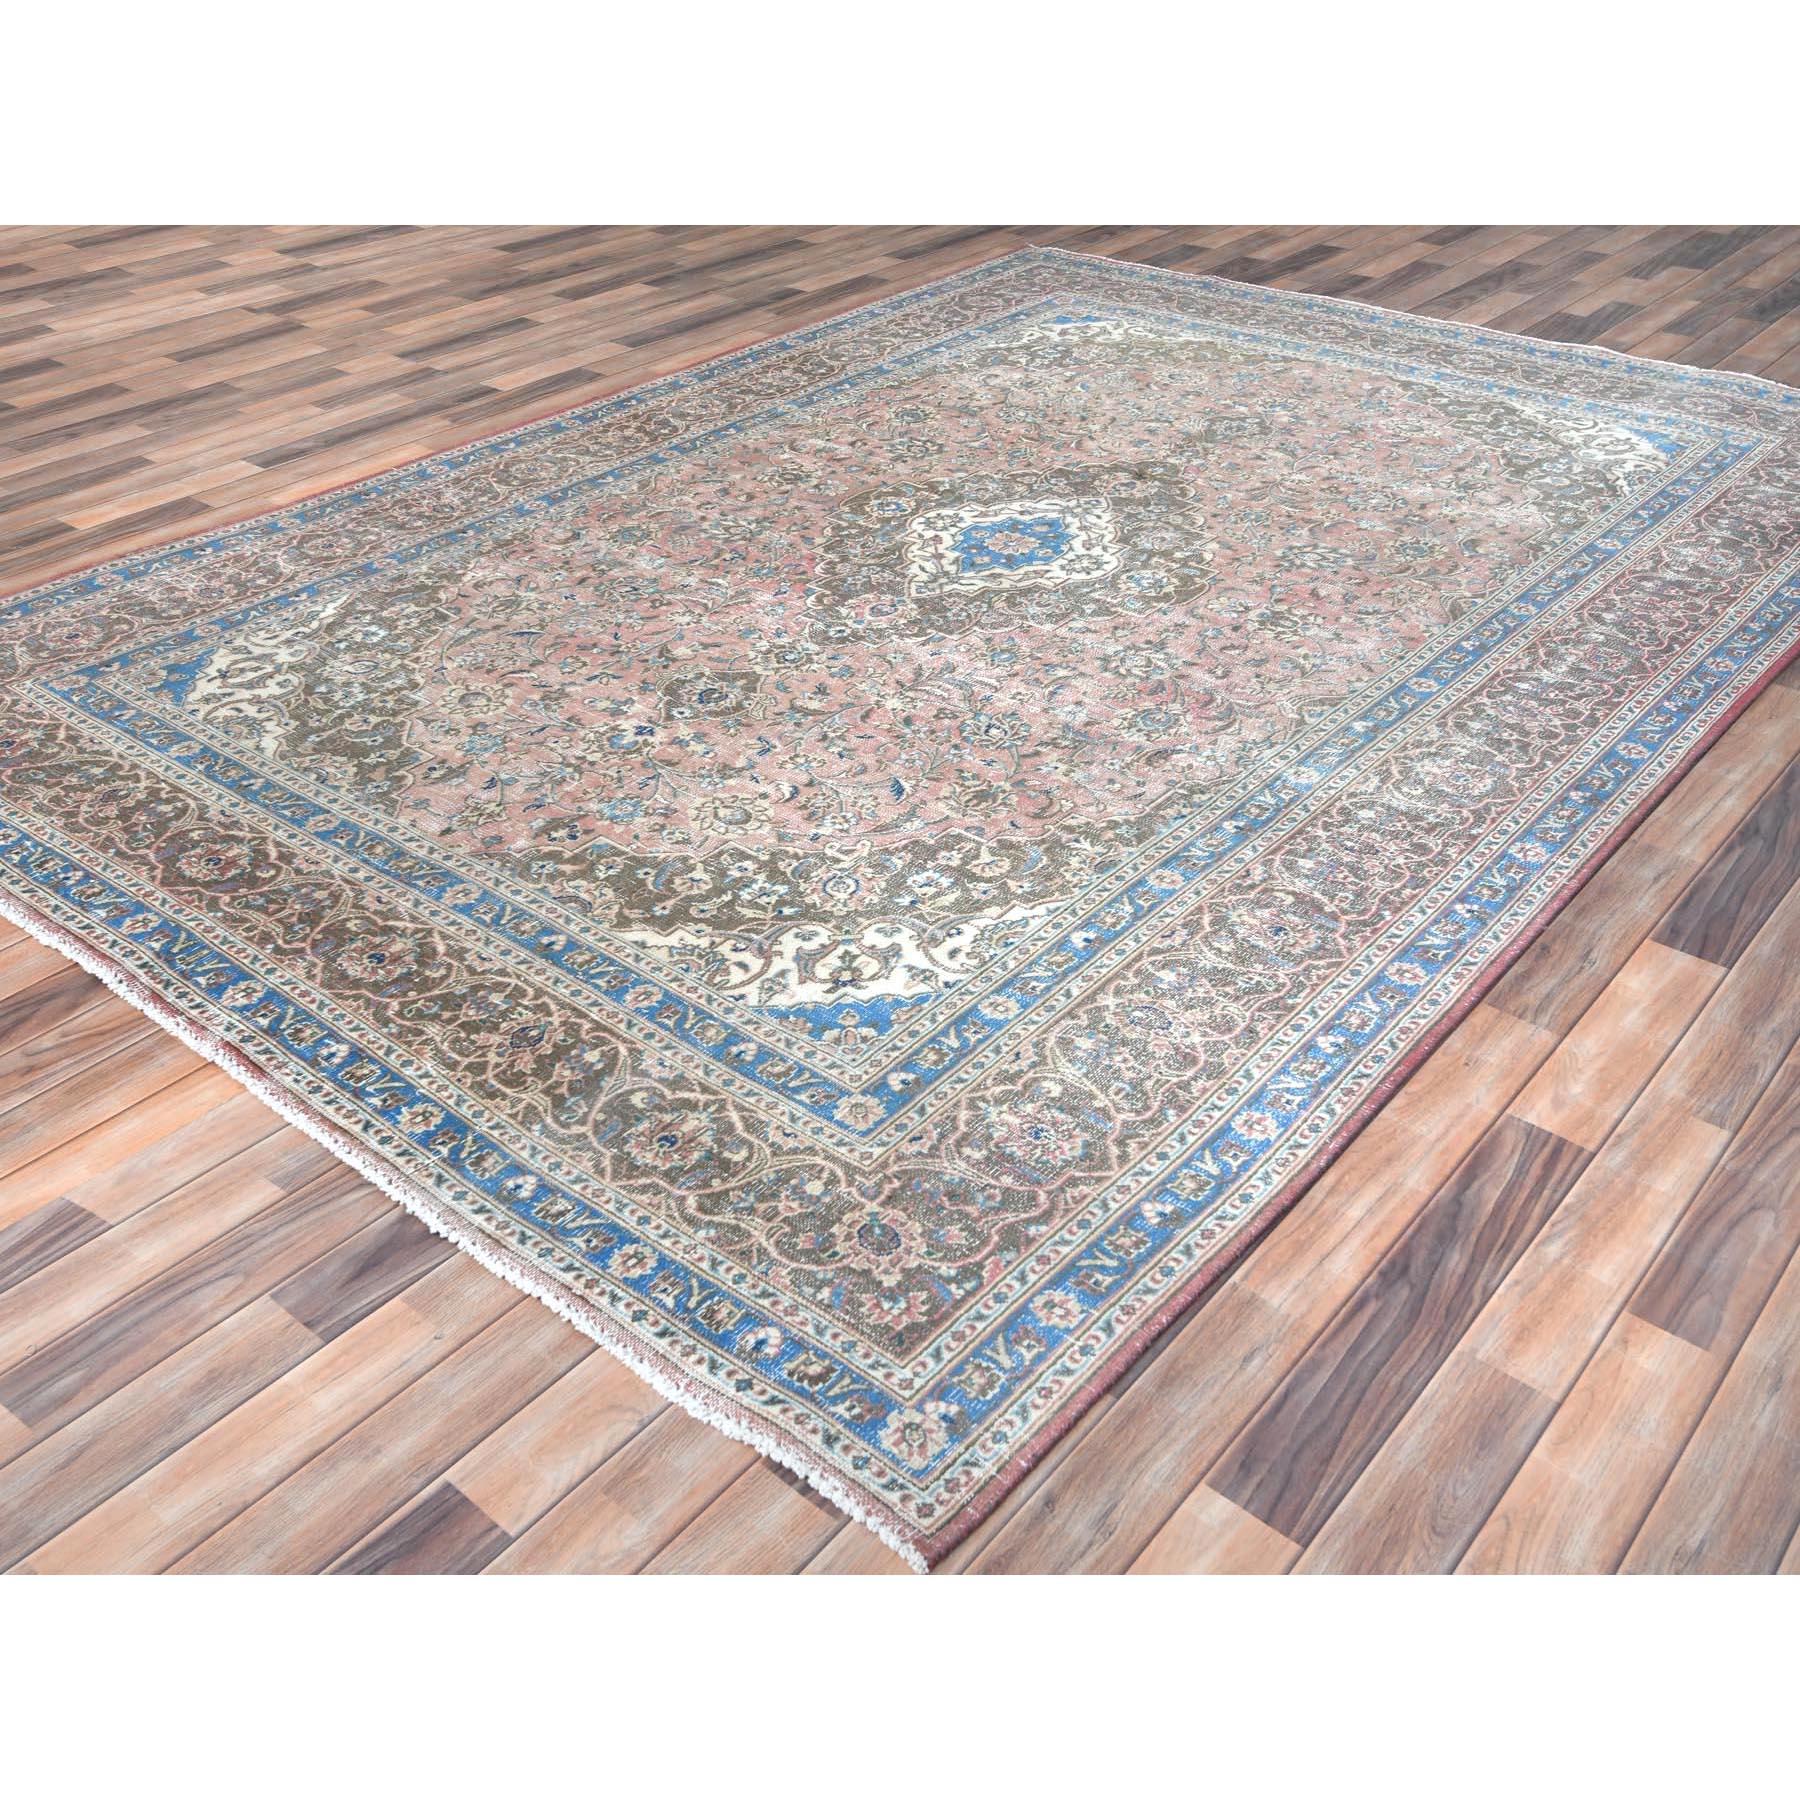 Peach Color Vintage Persian Tabriz Hand Knotted Worn Wool Distressed Look Rug In Good Condition For Sale In Carlstadt, NJ